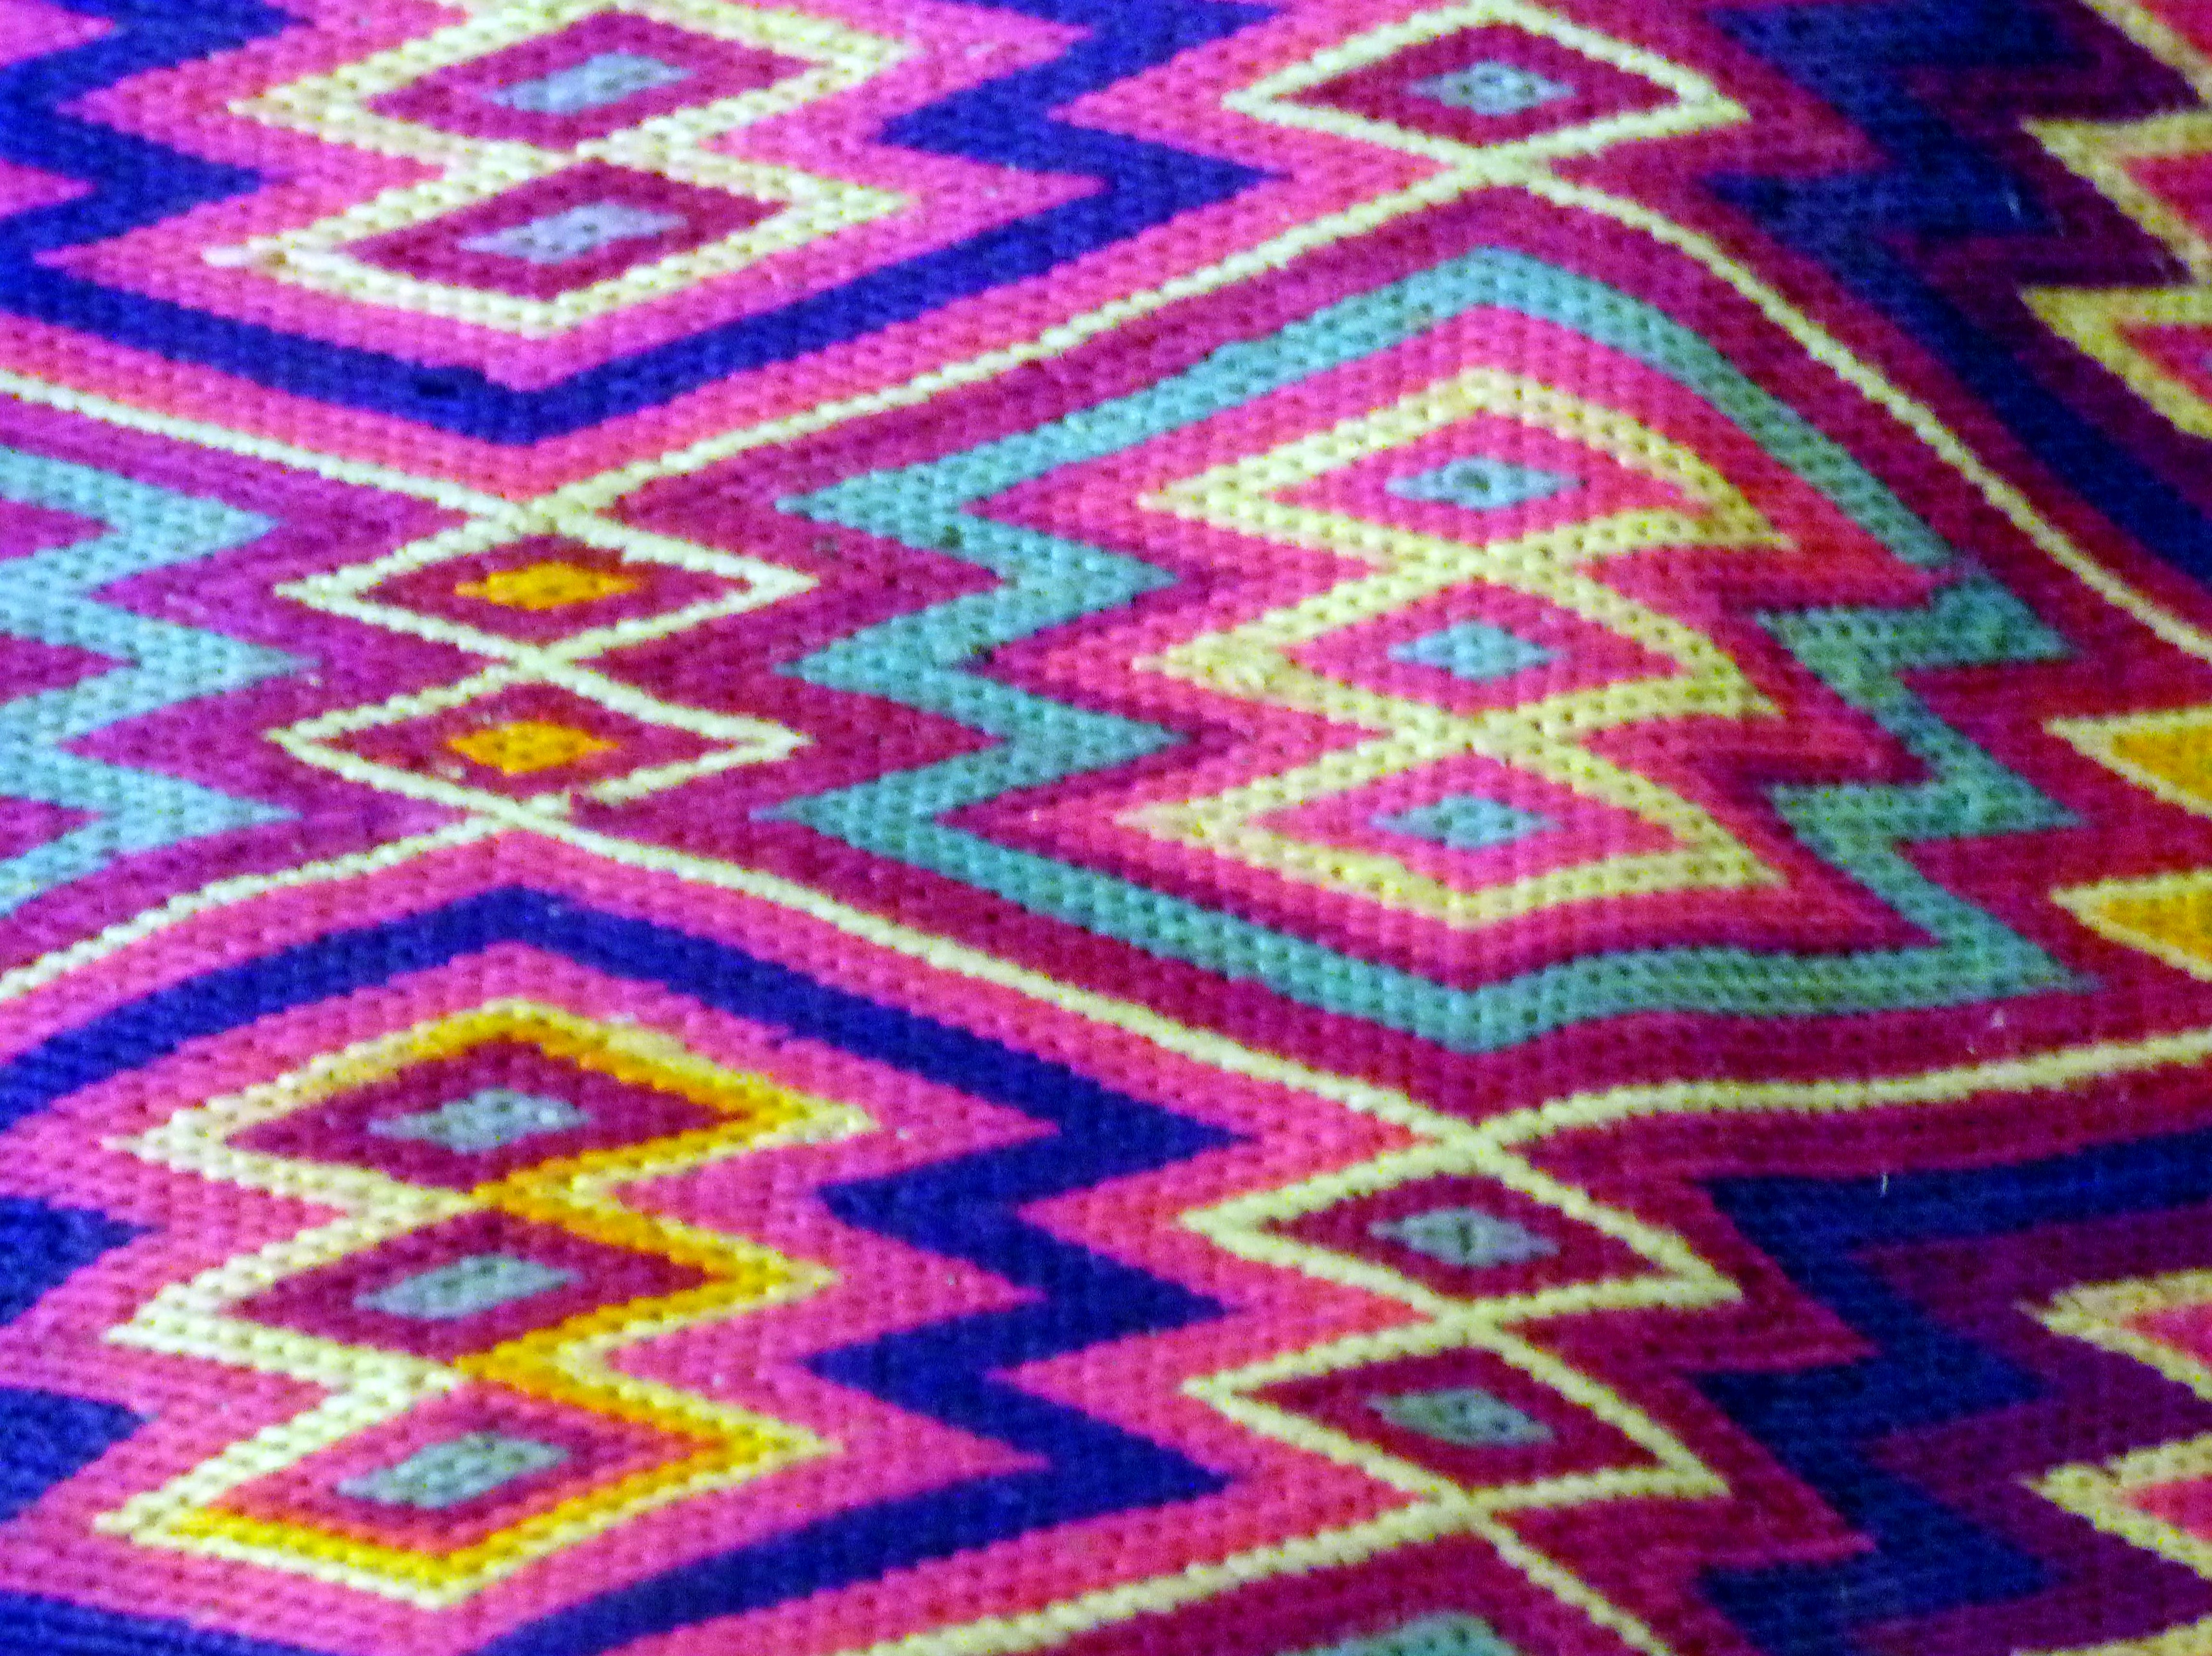 close up of hand embroidered textile in the collection of Nawal Gebreel, "Textiles of Afghanistan" Talk, Oct 2021